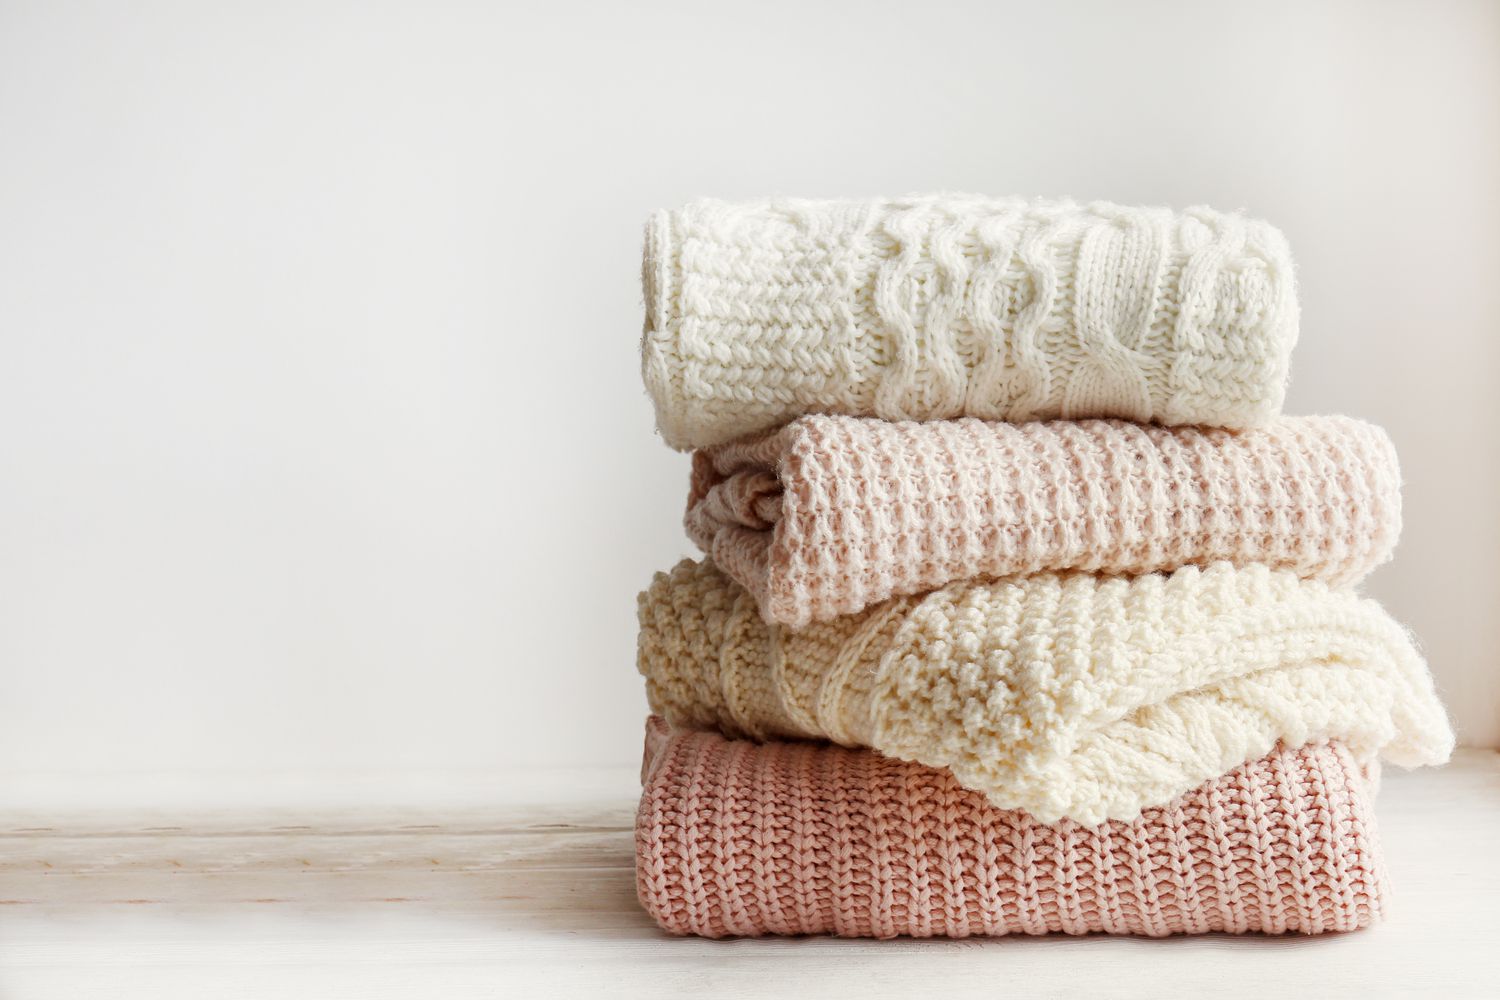 A pile of folded wool cable-knit sweaters in cream and peach tones